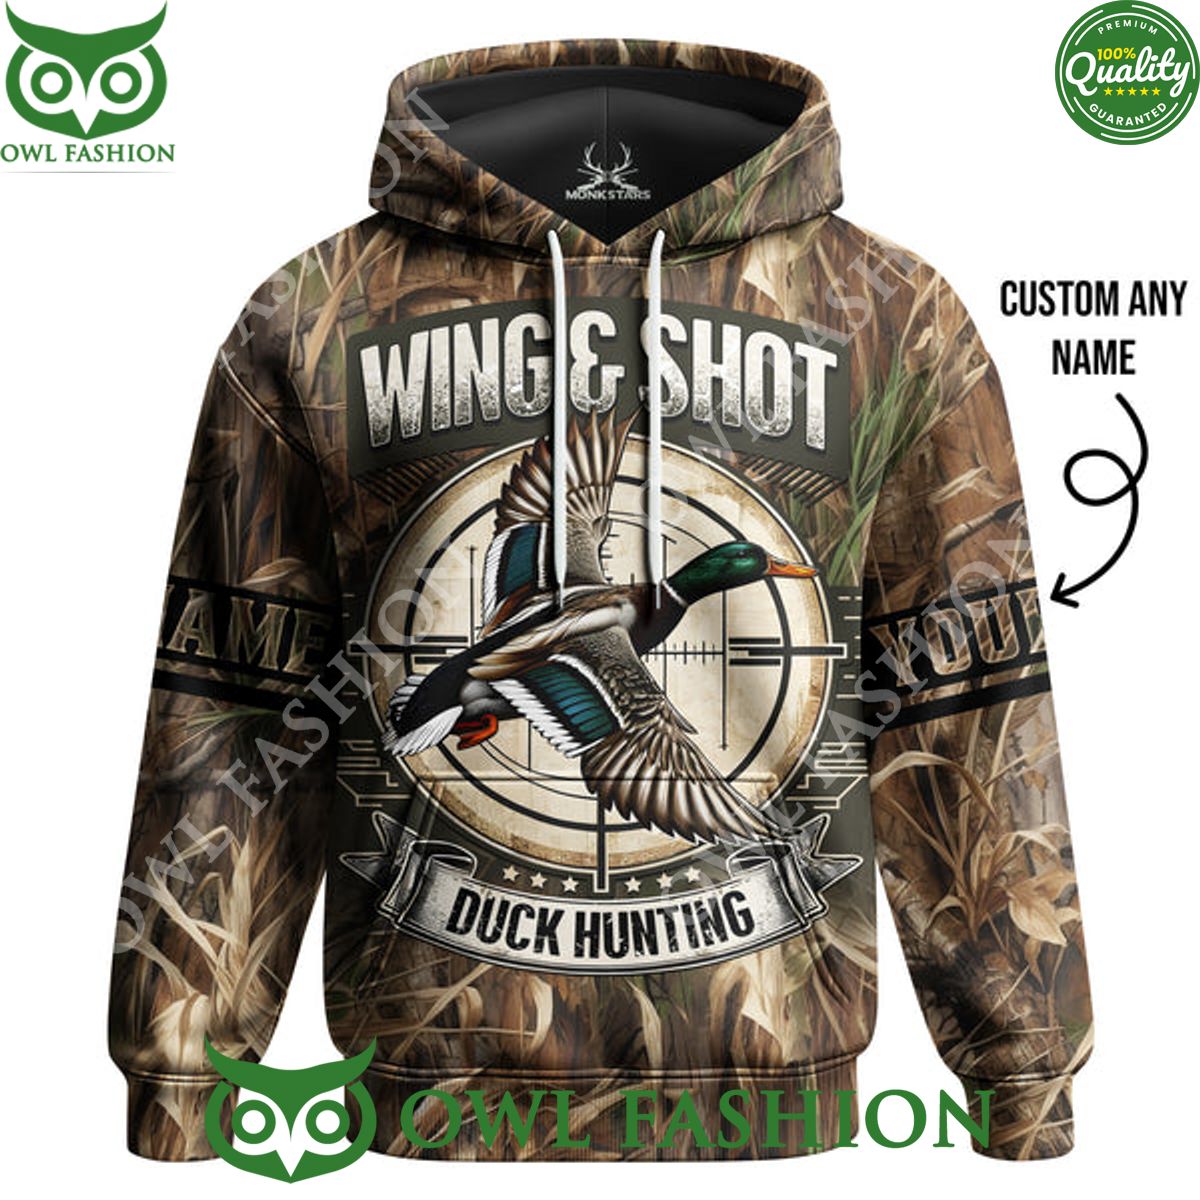 Wing and Shot Duck Hunting Custom Name 3D hoodie Such a charming picture.